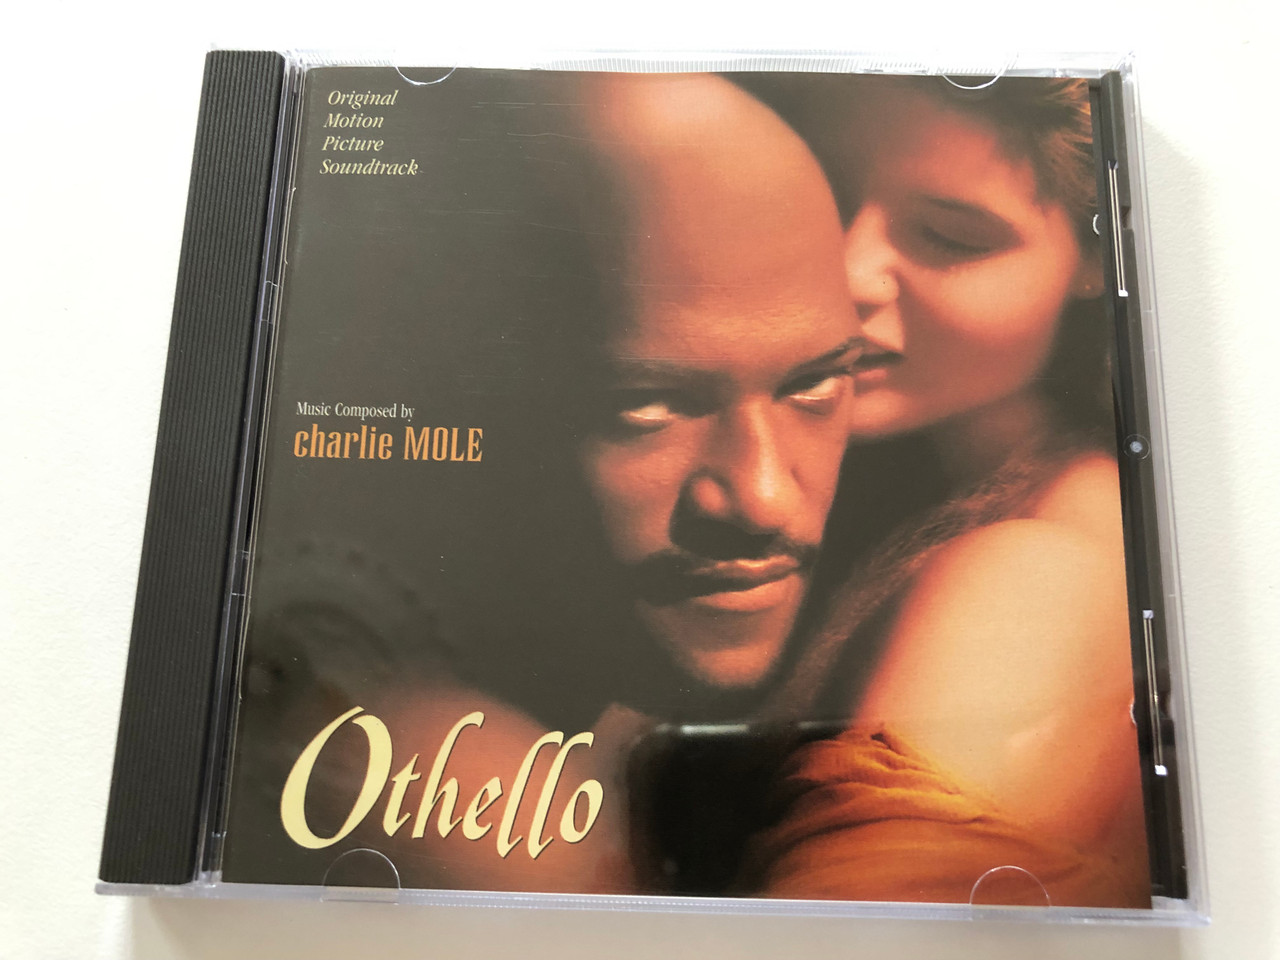 https://cdn10.bigcommerce.com/s-62bdpkt7pb/products/31179/images/183544/Othello_Original_Motion_Picture_Soundtrack_-_Music_composed_by_Charlie_Mole_Varse_Sarabande_Audio_CD_1995_VSD-5689_1__87132.1625598557.1280.1280.JPG?c=2